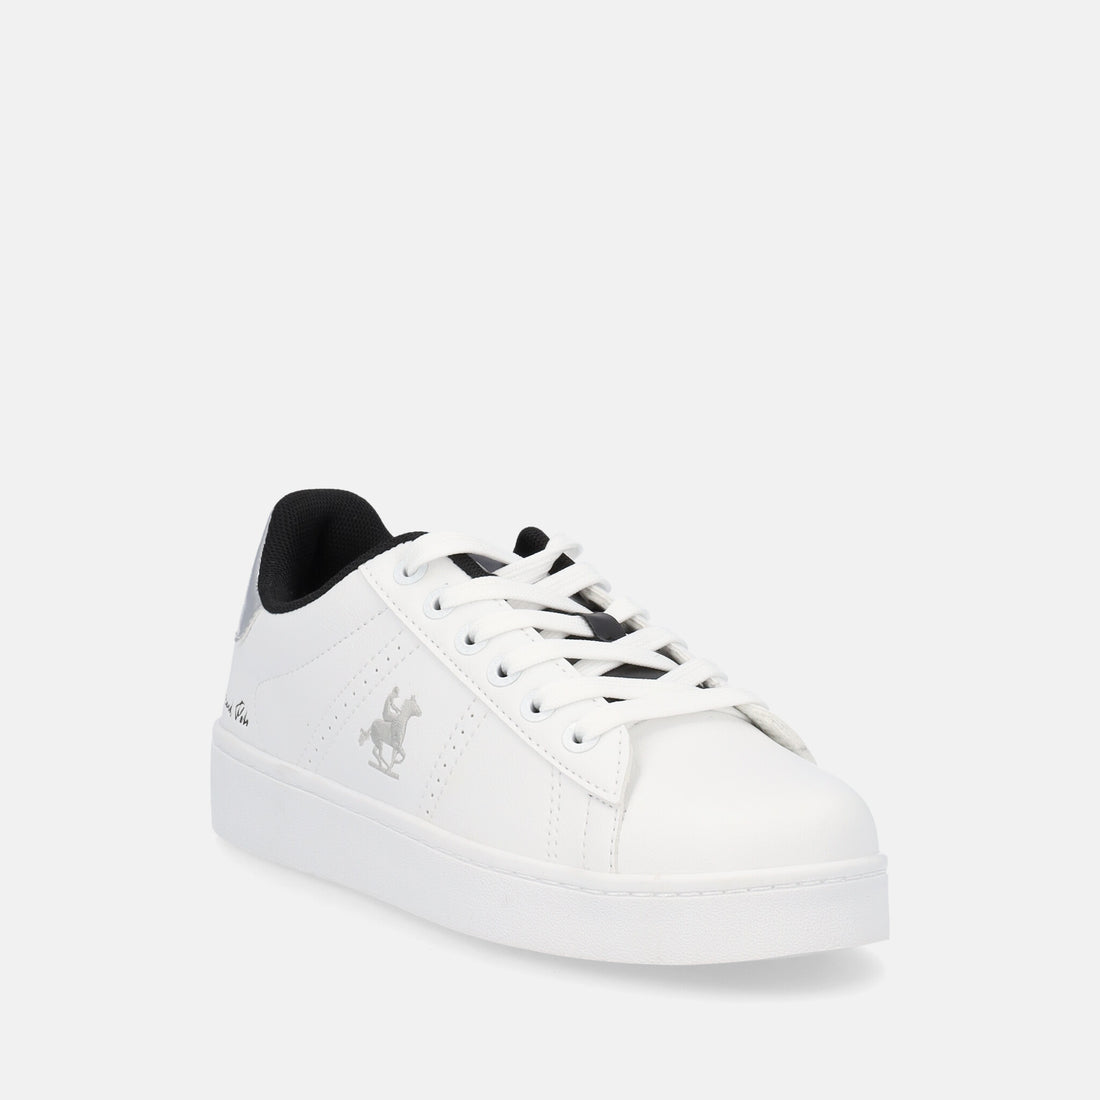 US GRAND POLO SNEAKERS